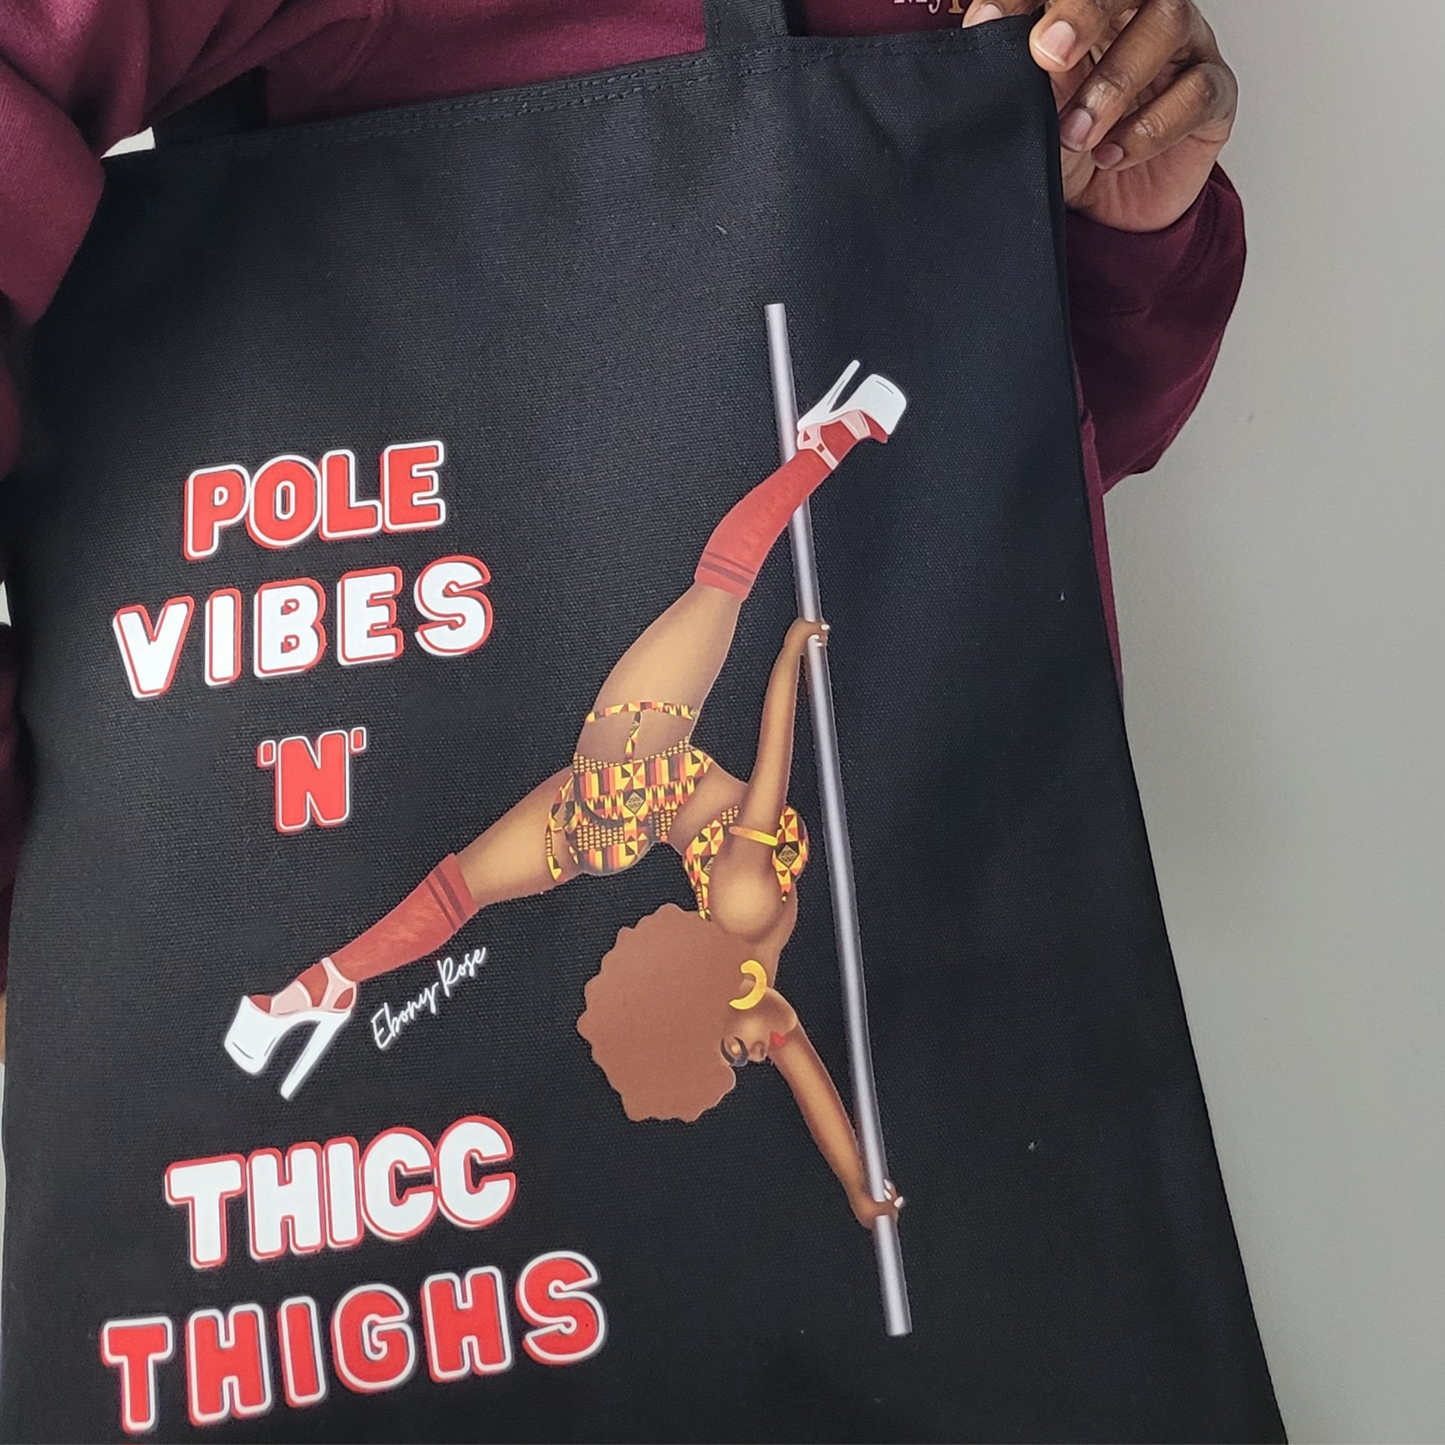 Pole Vibes 'N" Thicc Thighs - Black Pole Dancer Tote Bag